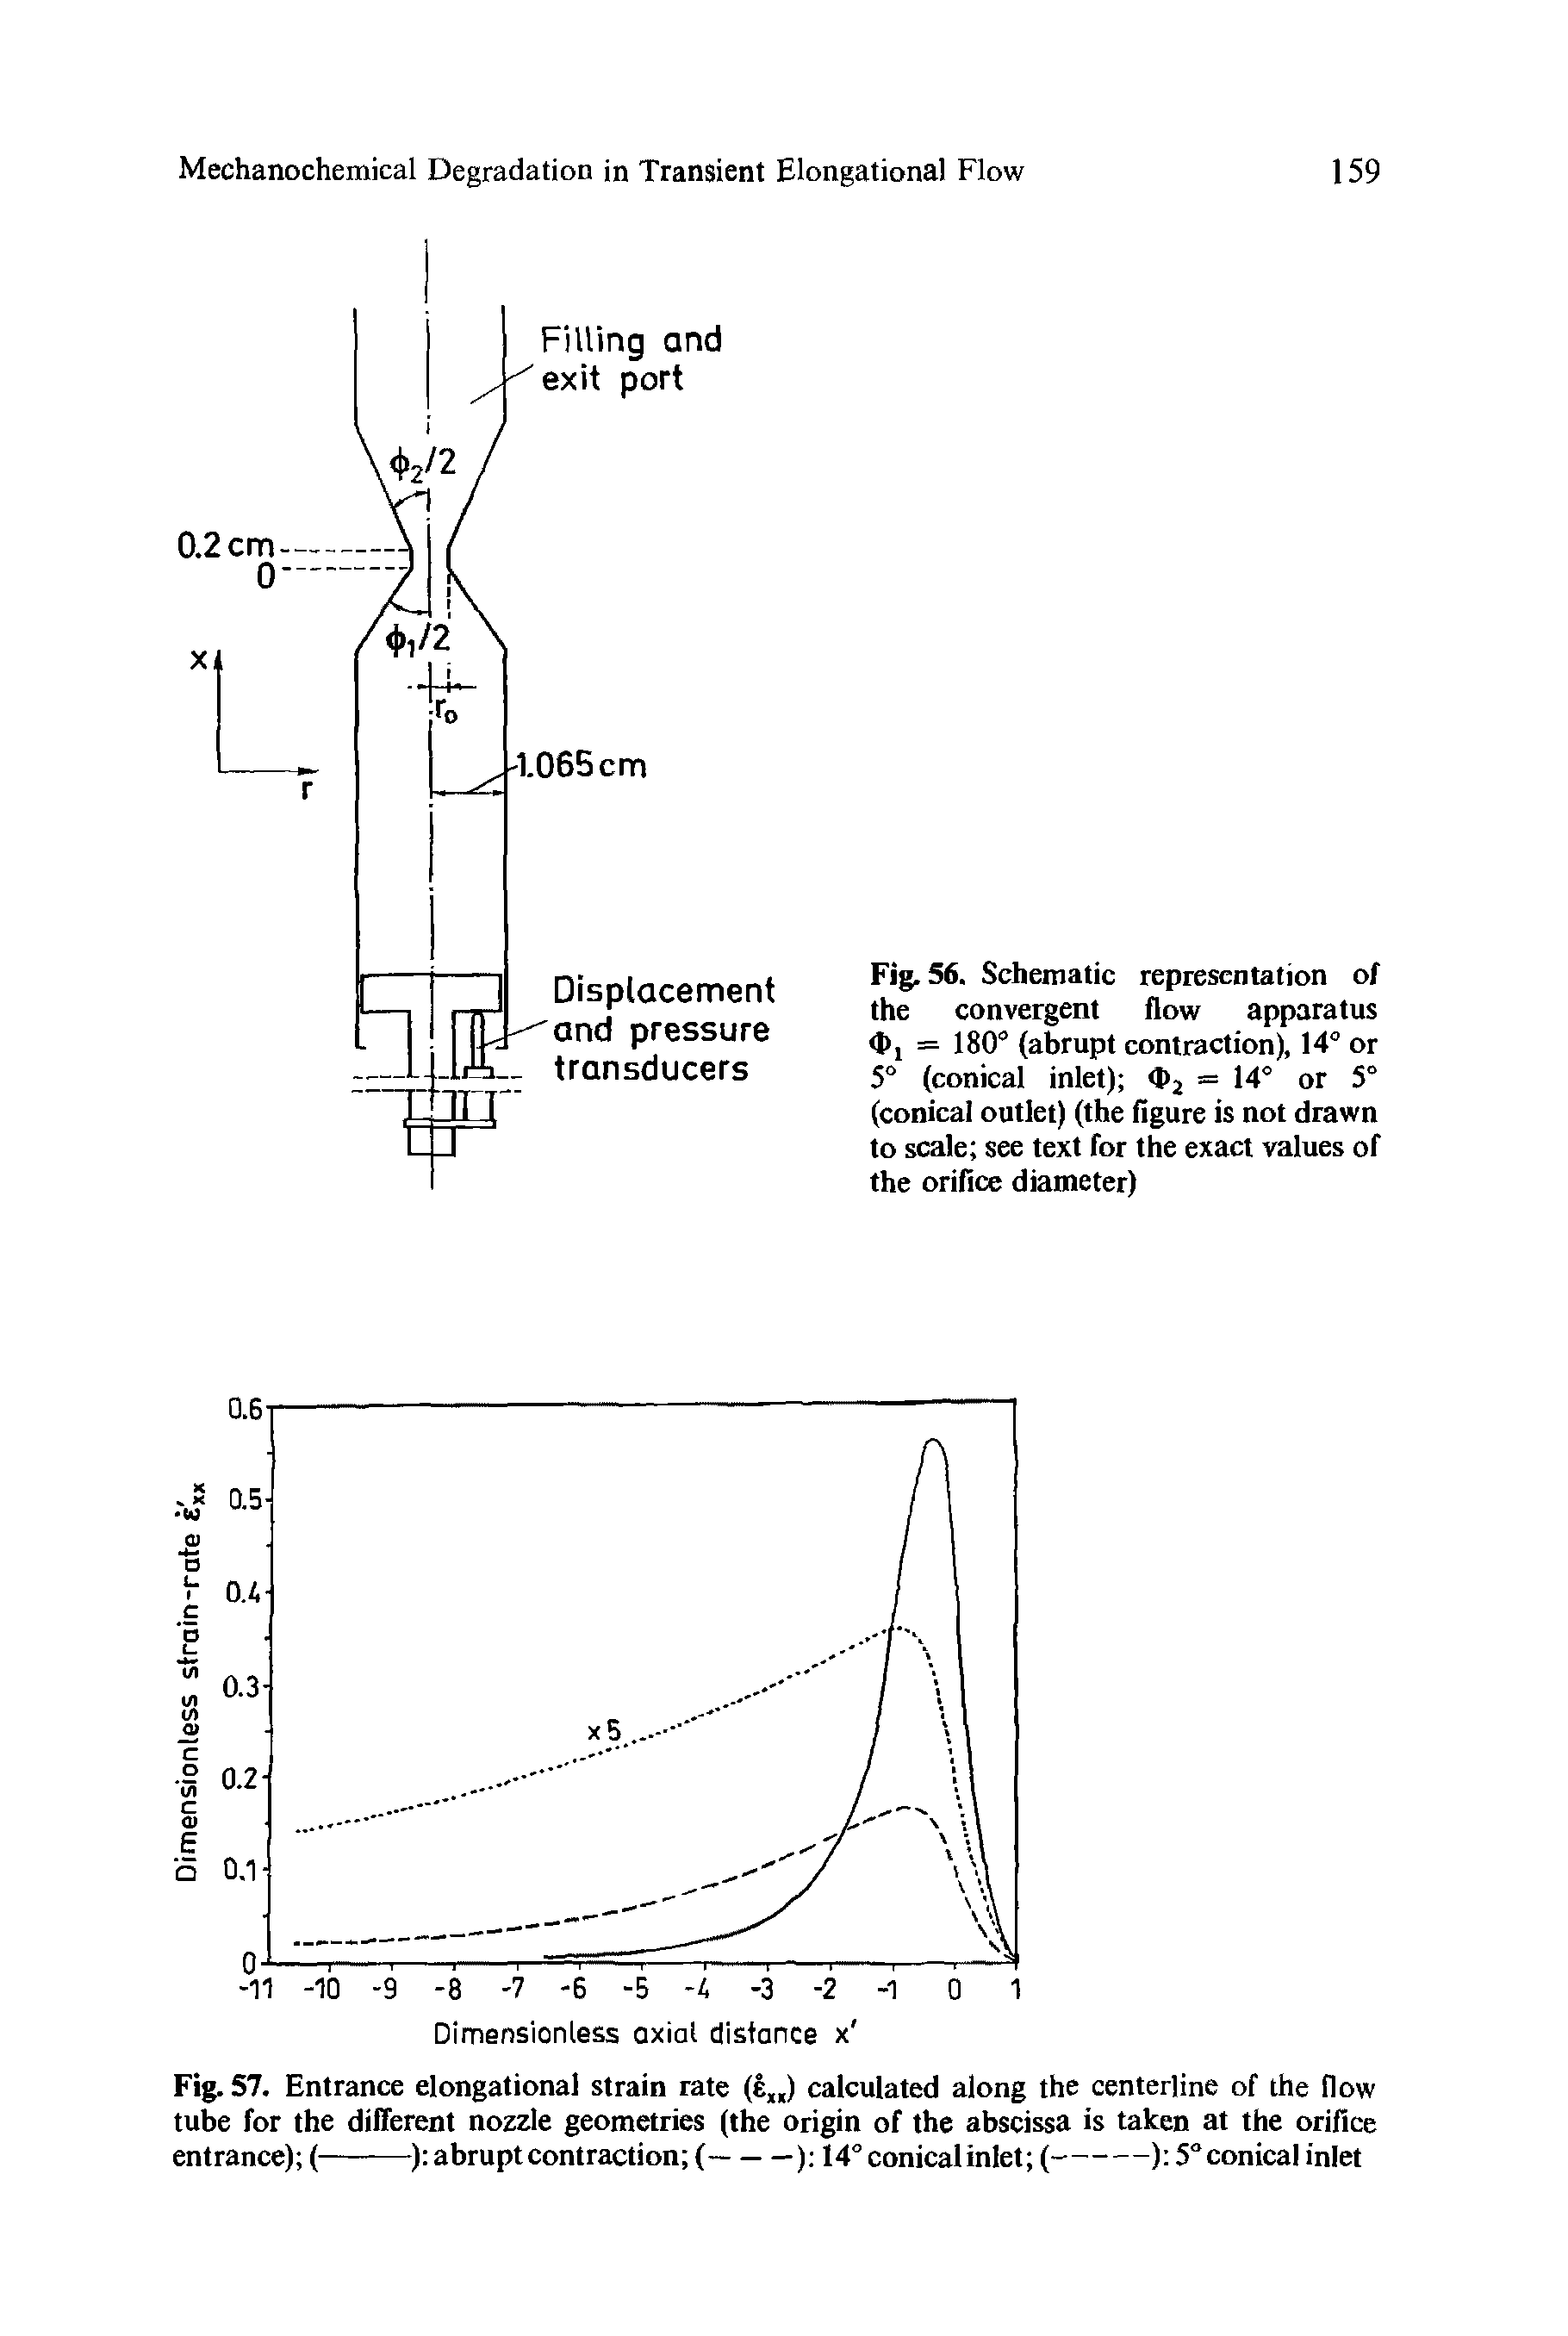 Fig. 56. Schematic representation of the convergent flow apparatus < > = 180° (abrupt contraction), 14° or 5° (conical inlet) <h2 = 14° or 5° (conical outlet) (the figure is not drawn to scale see text for the exact values of the orifice diameter)...